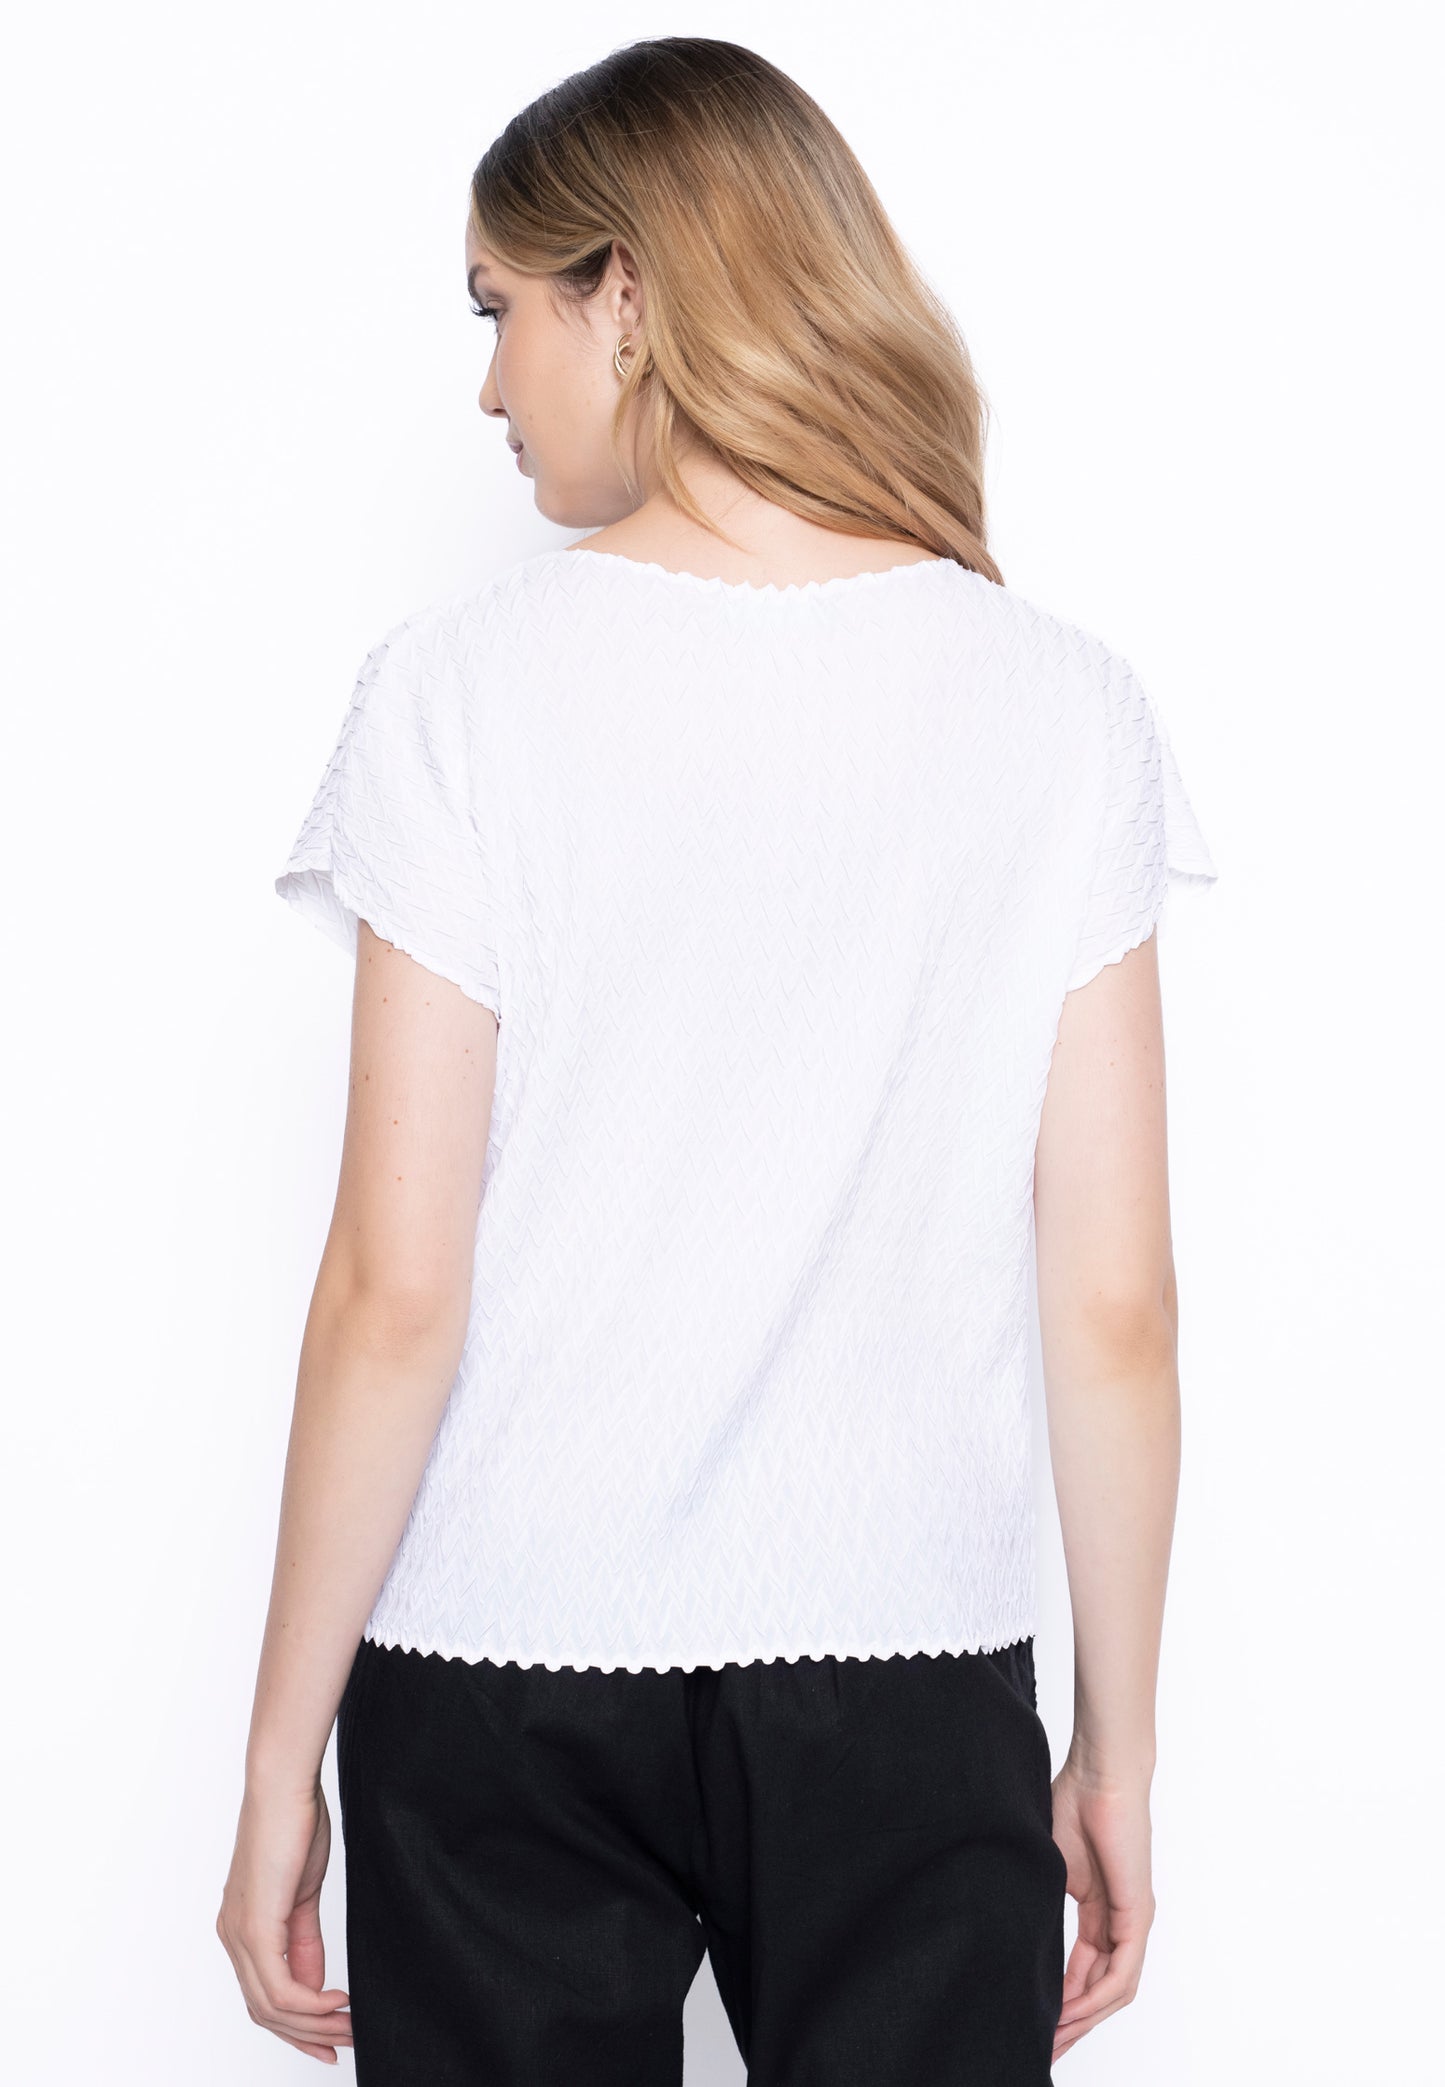 The Short Sleeve Pleated Top in white, a back view.